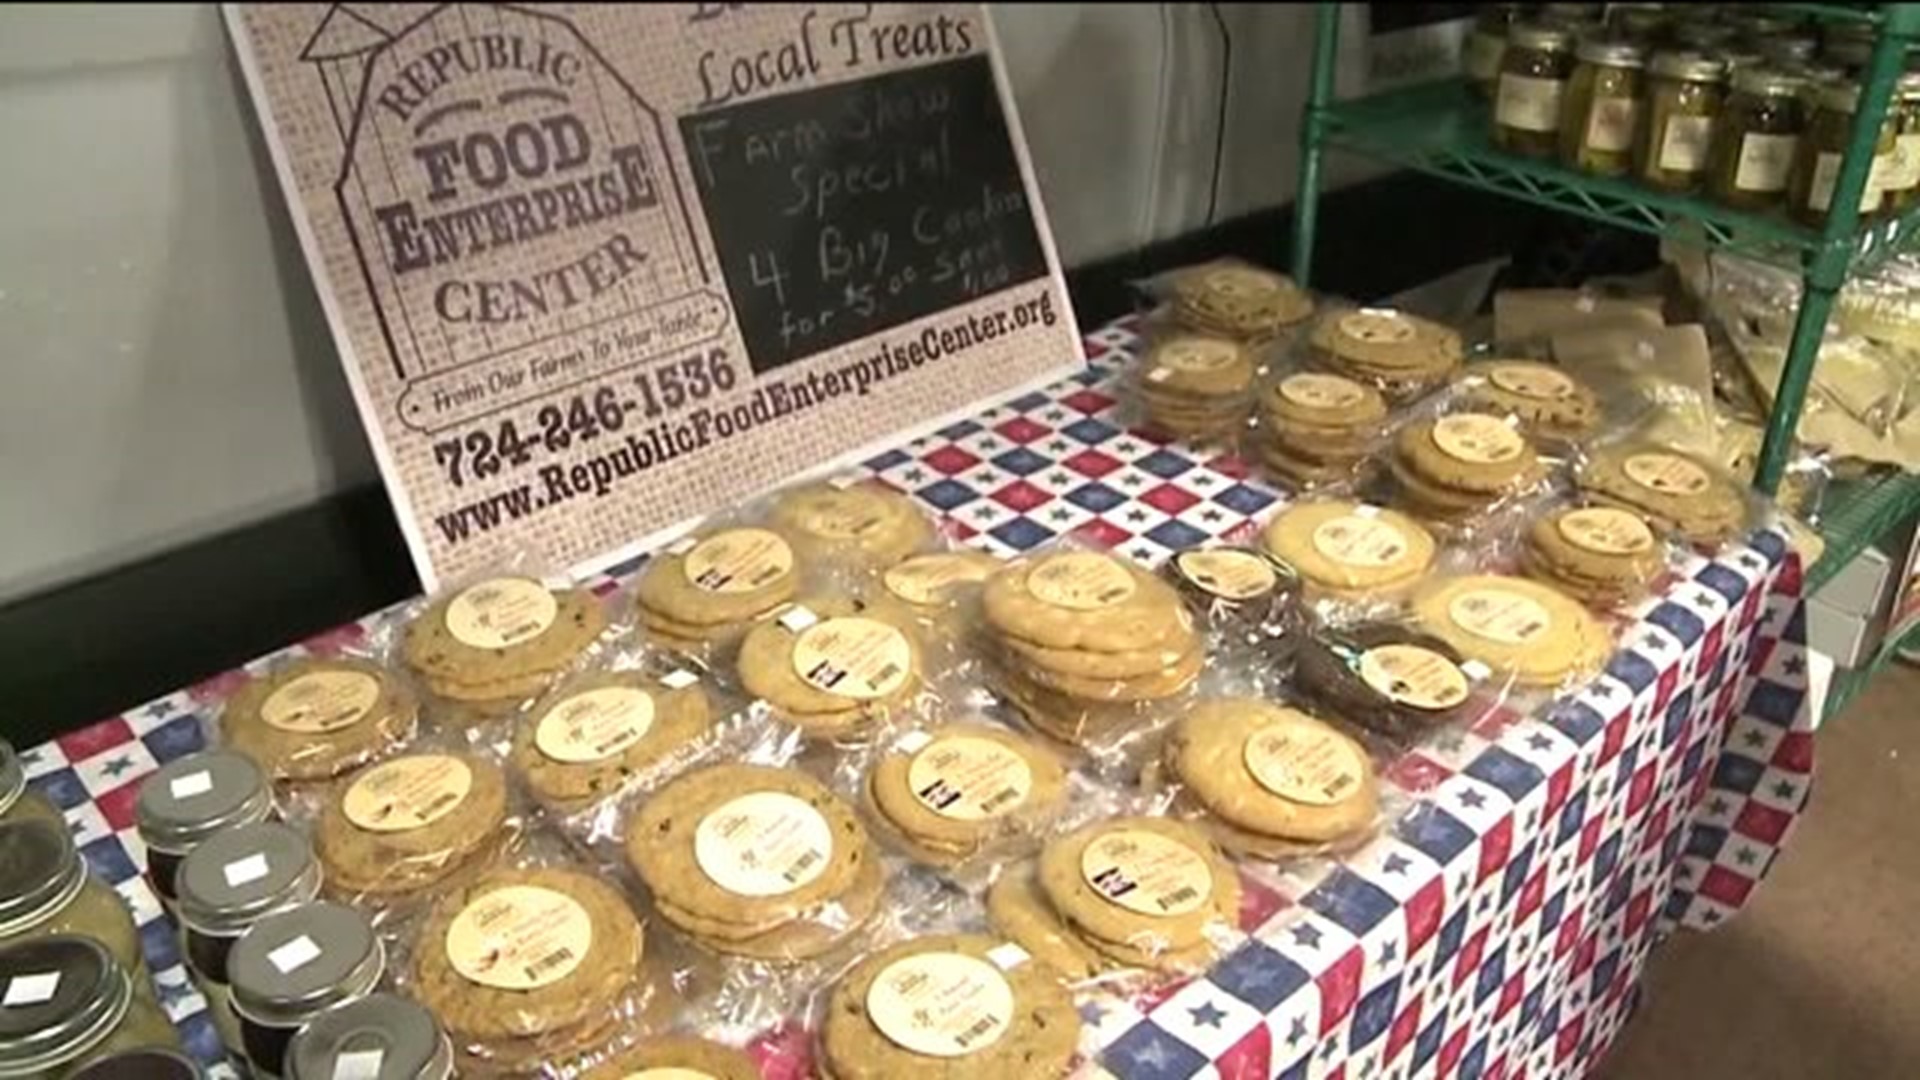 A commercial kitchen that works with local farmers brings their products to the 101st Pennsylvania Farm Show